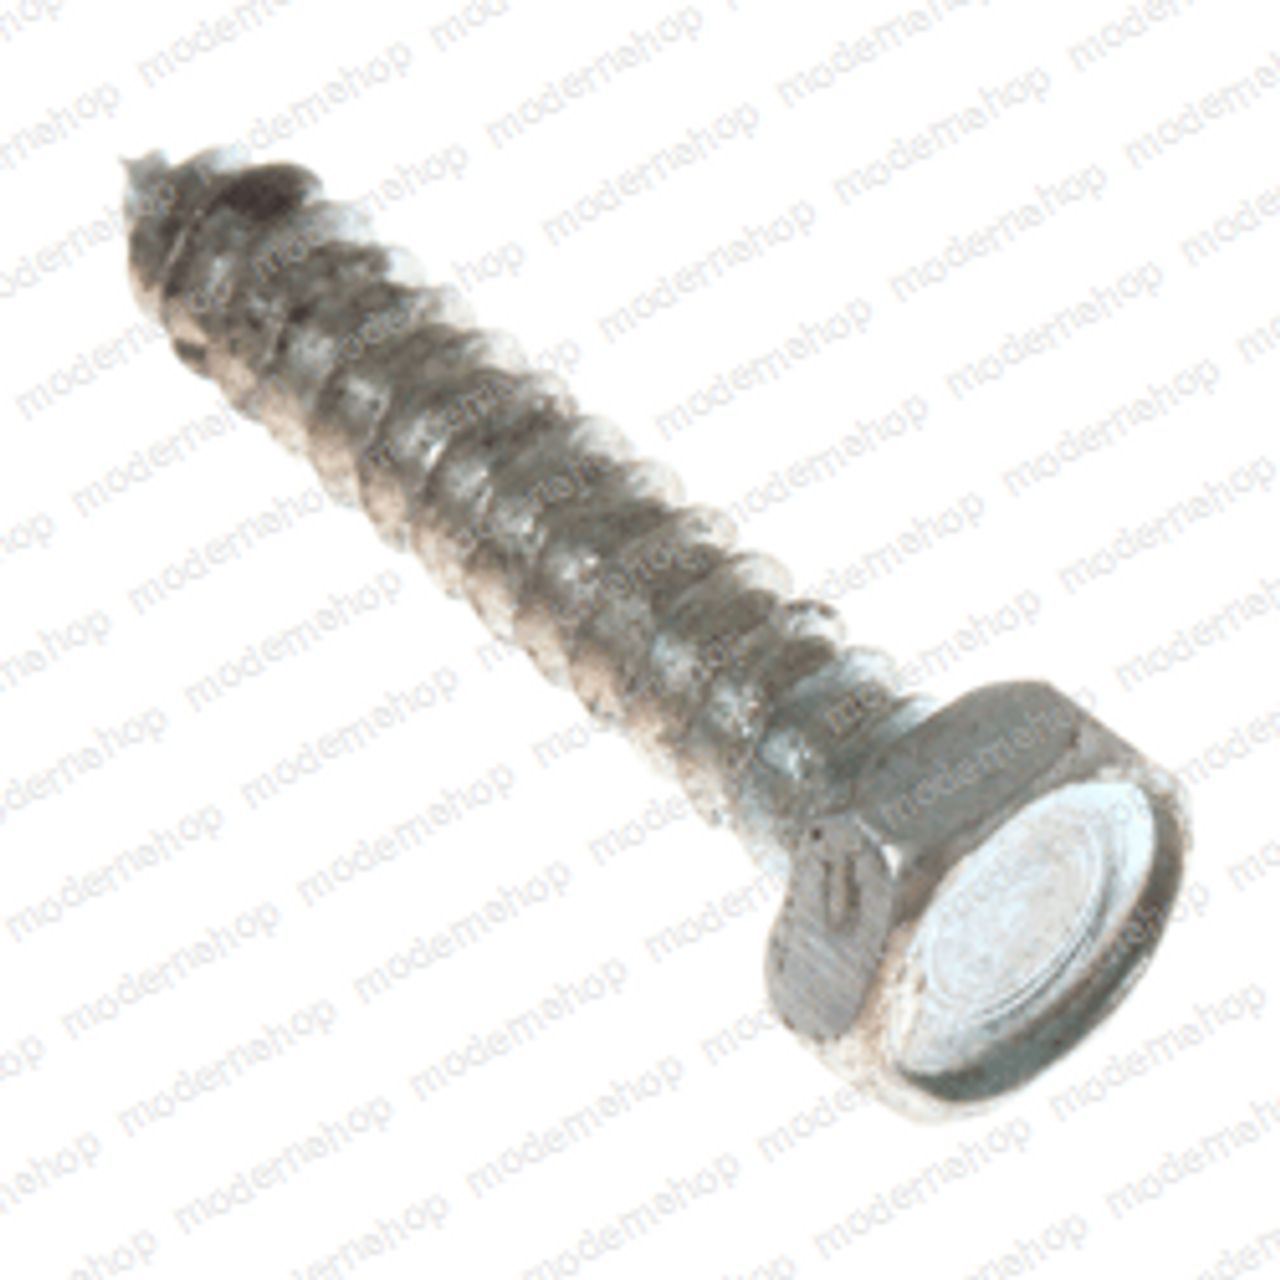 49330-00: Prime Mover Forklift TAPPING SCREW